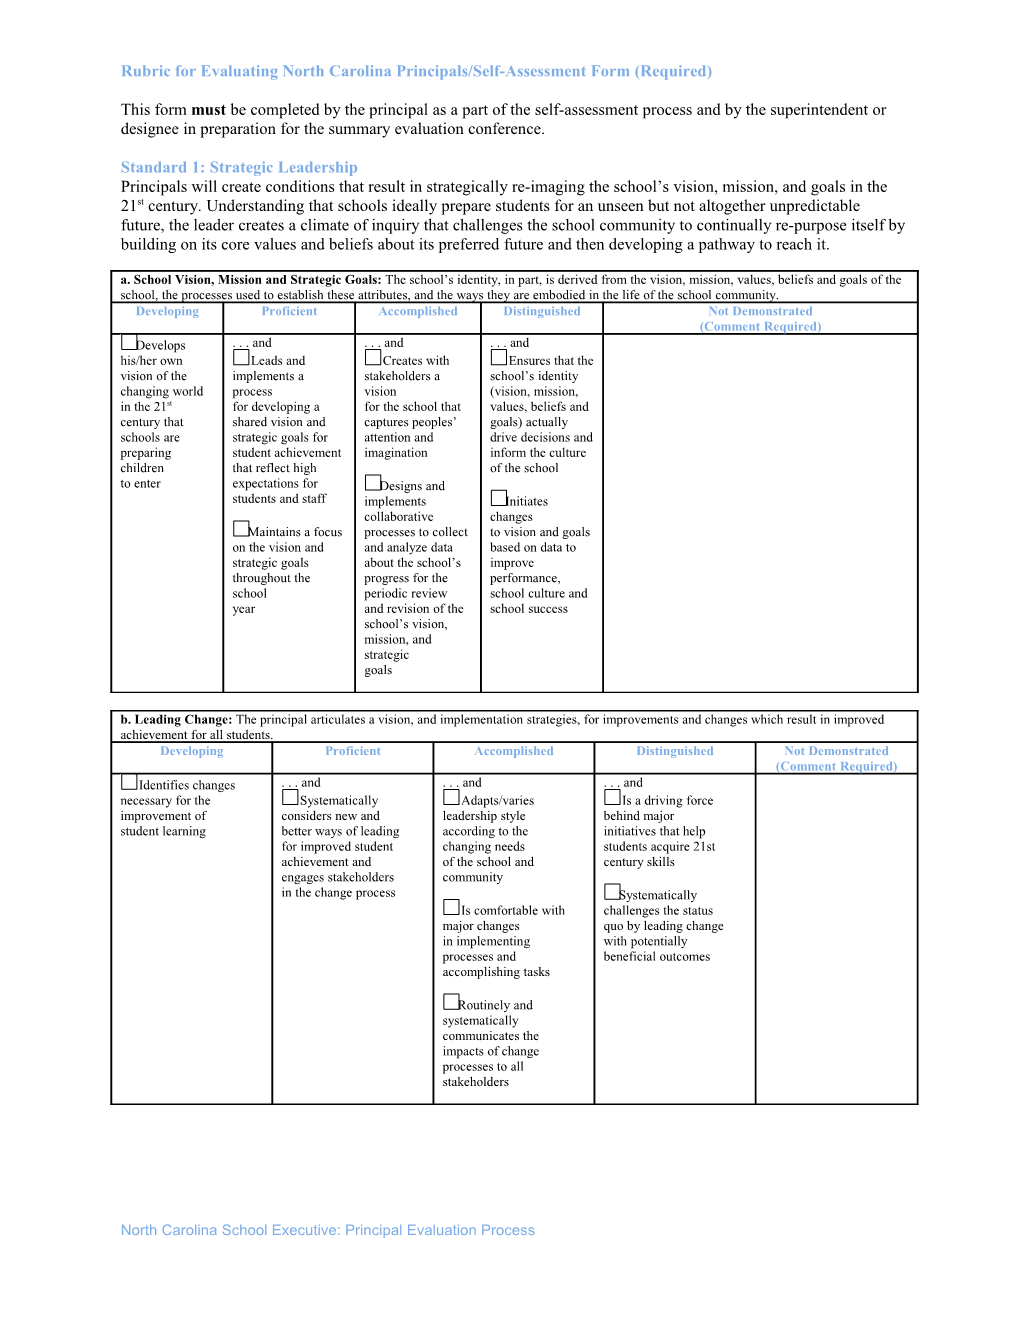 Rubric for Evaluating North Carolina Principals/Self-Assessment Form (Required)